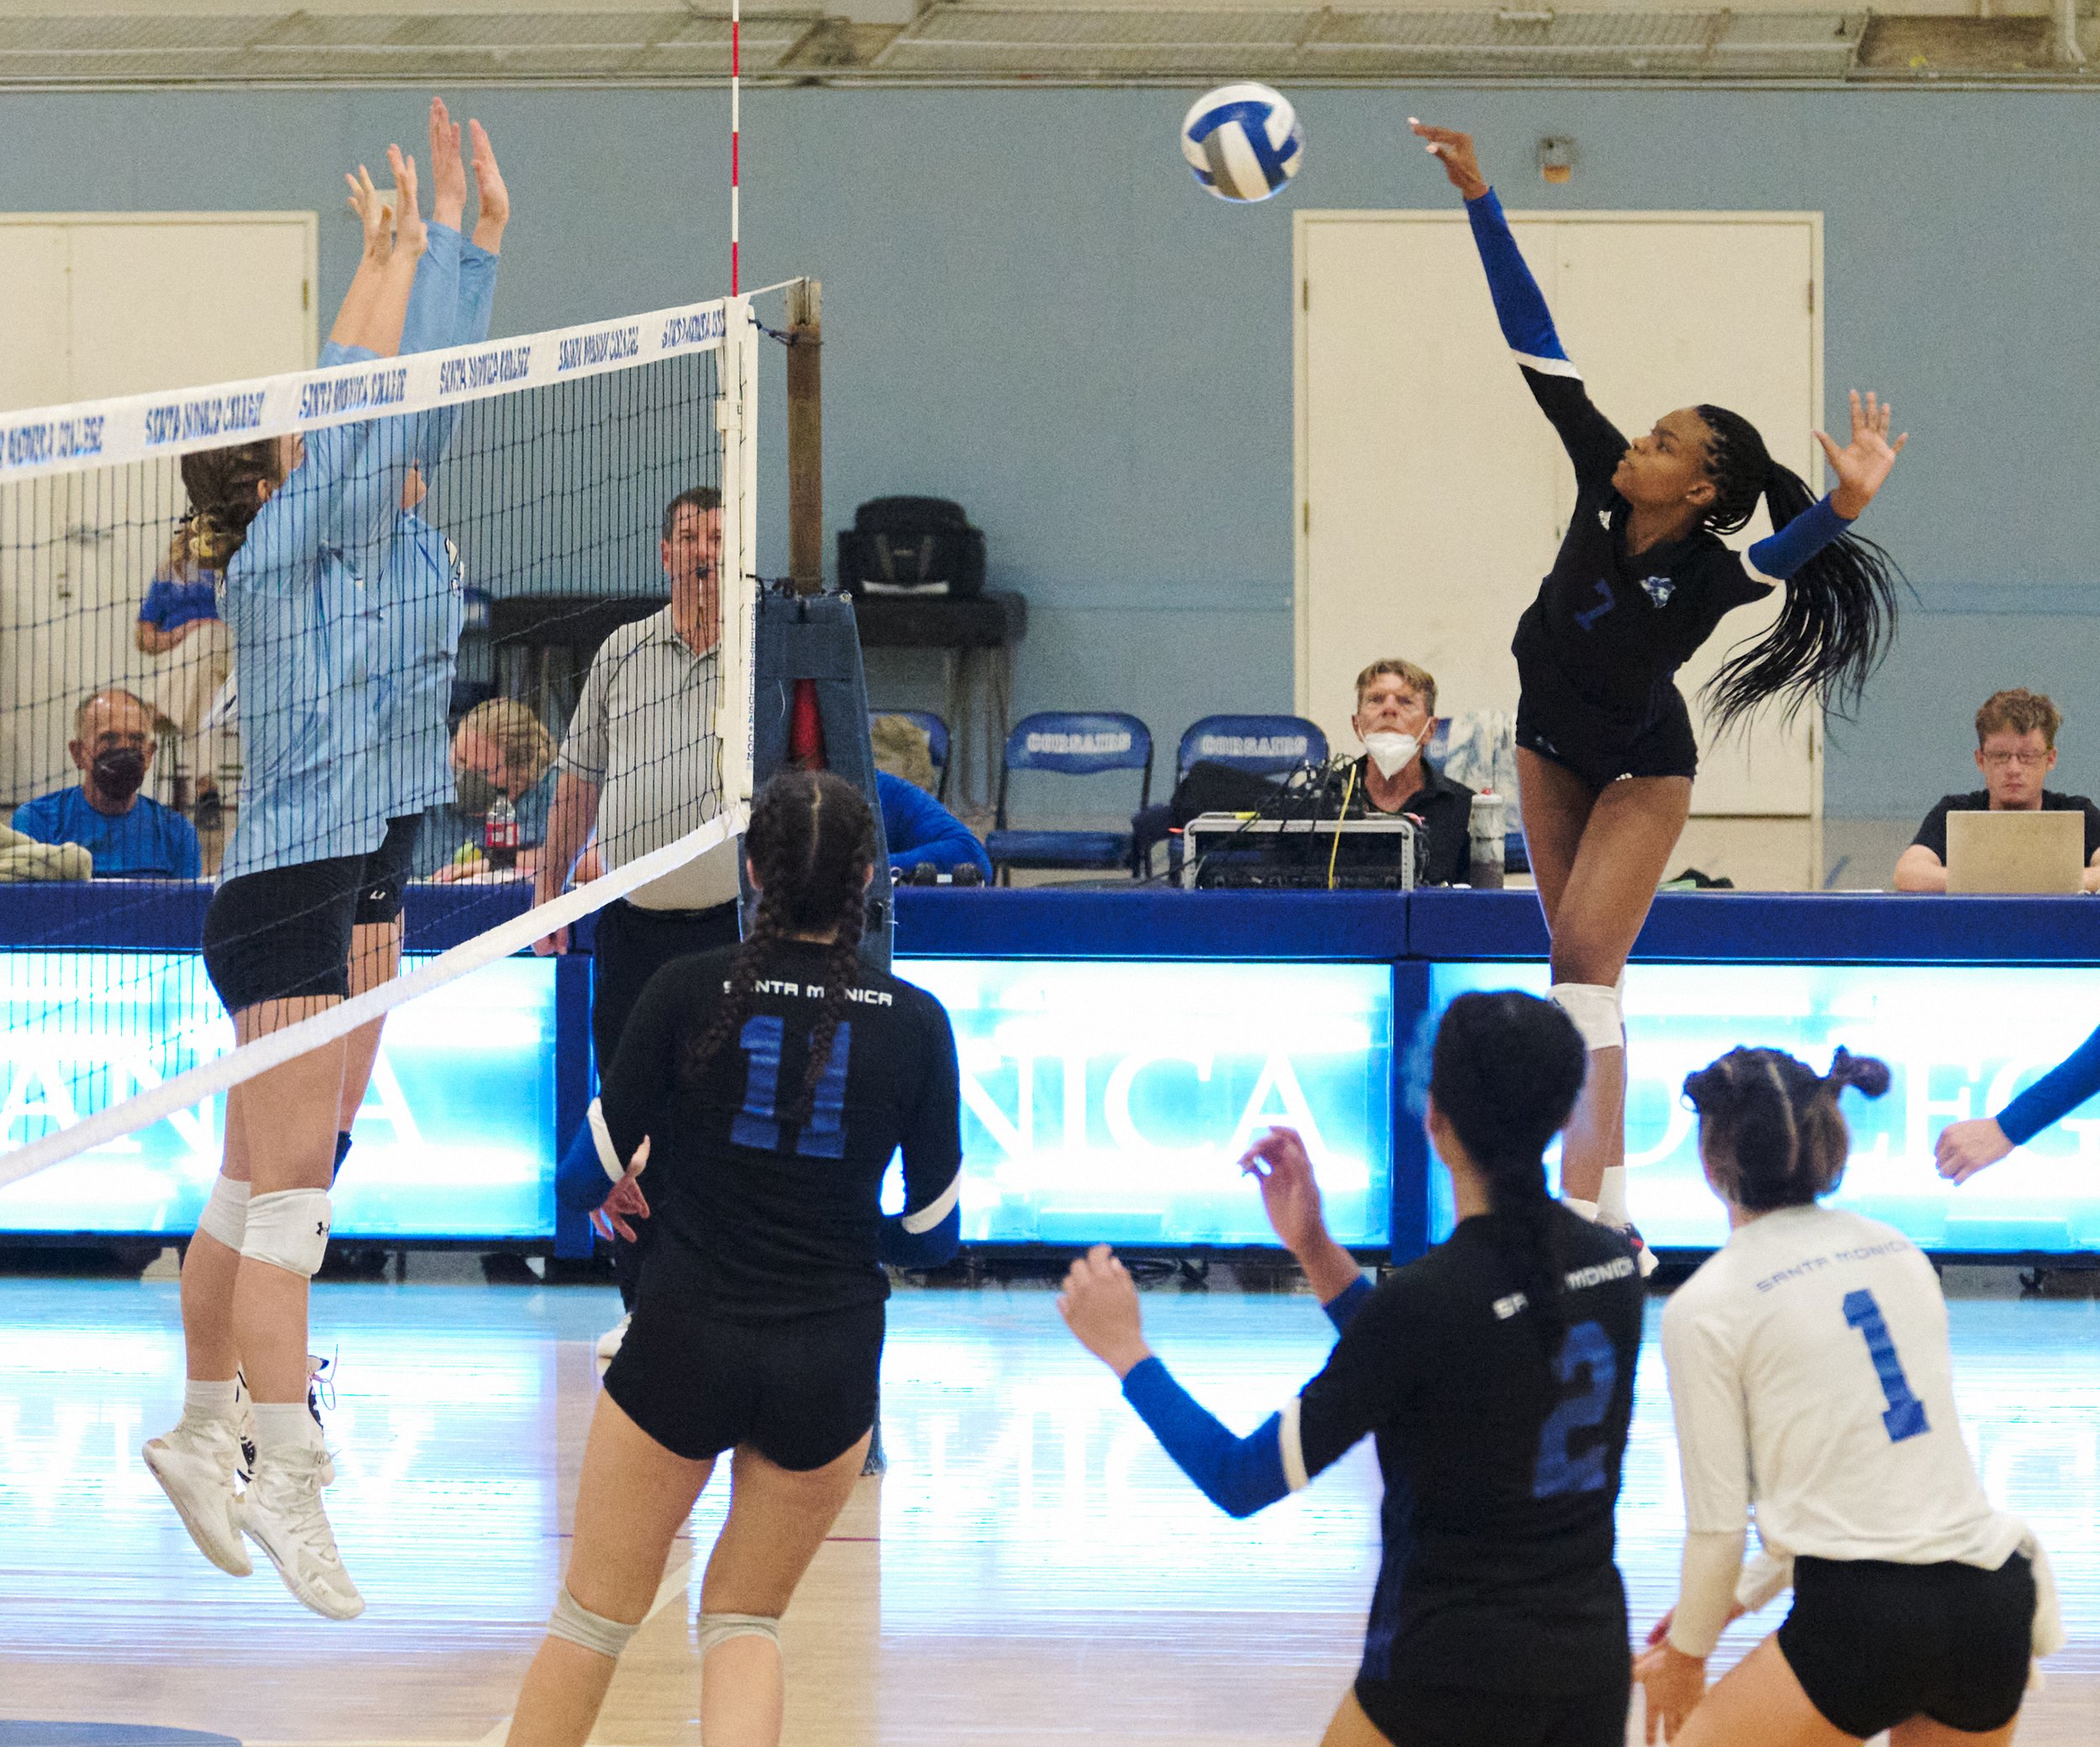  Santa Monica College Corsairs' Zarha Stanton (right) hits the ball during the women's volleyball match against the Moorpark College Raiders on Friday, Sept. 23, 2022, at the Corsair Gym in Santa Monica, Calif. The Corsairs won 3-2. (Nicholas McCall 